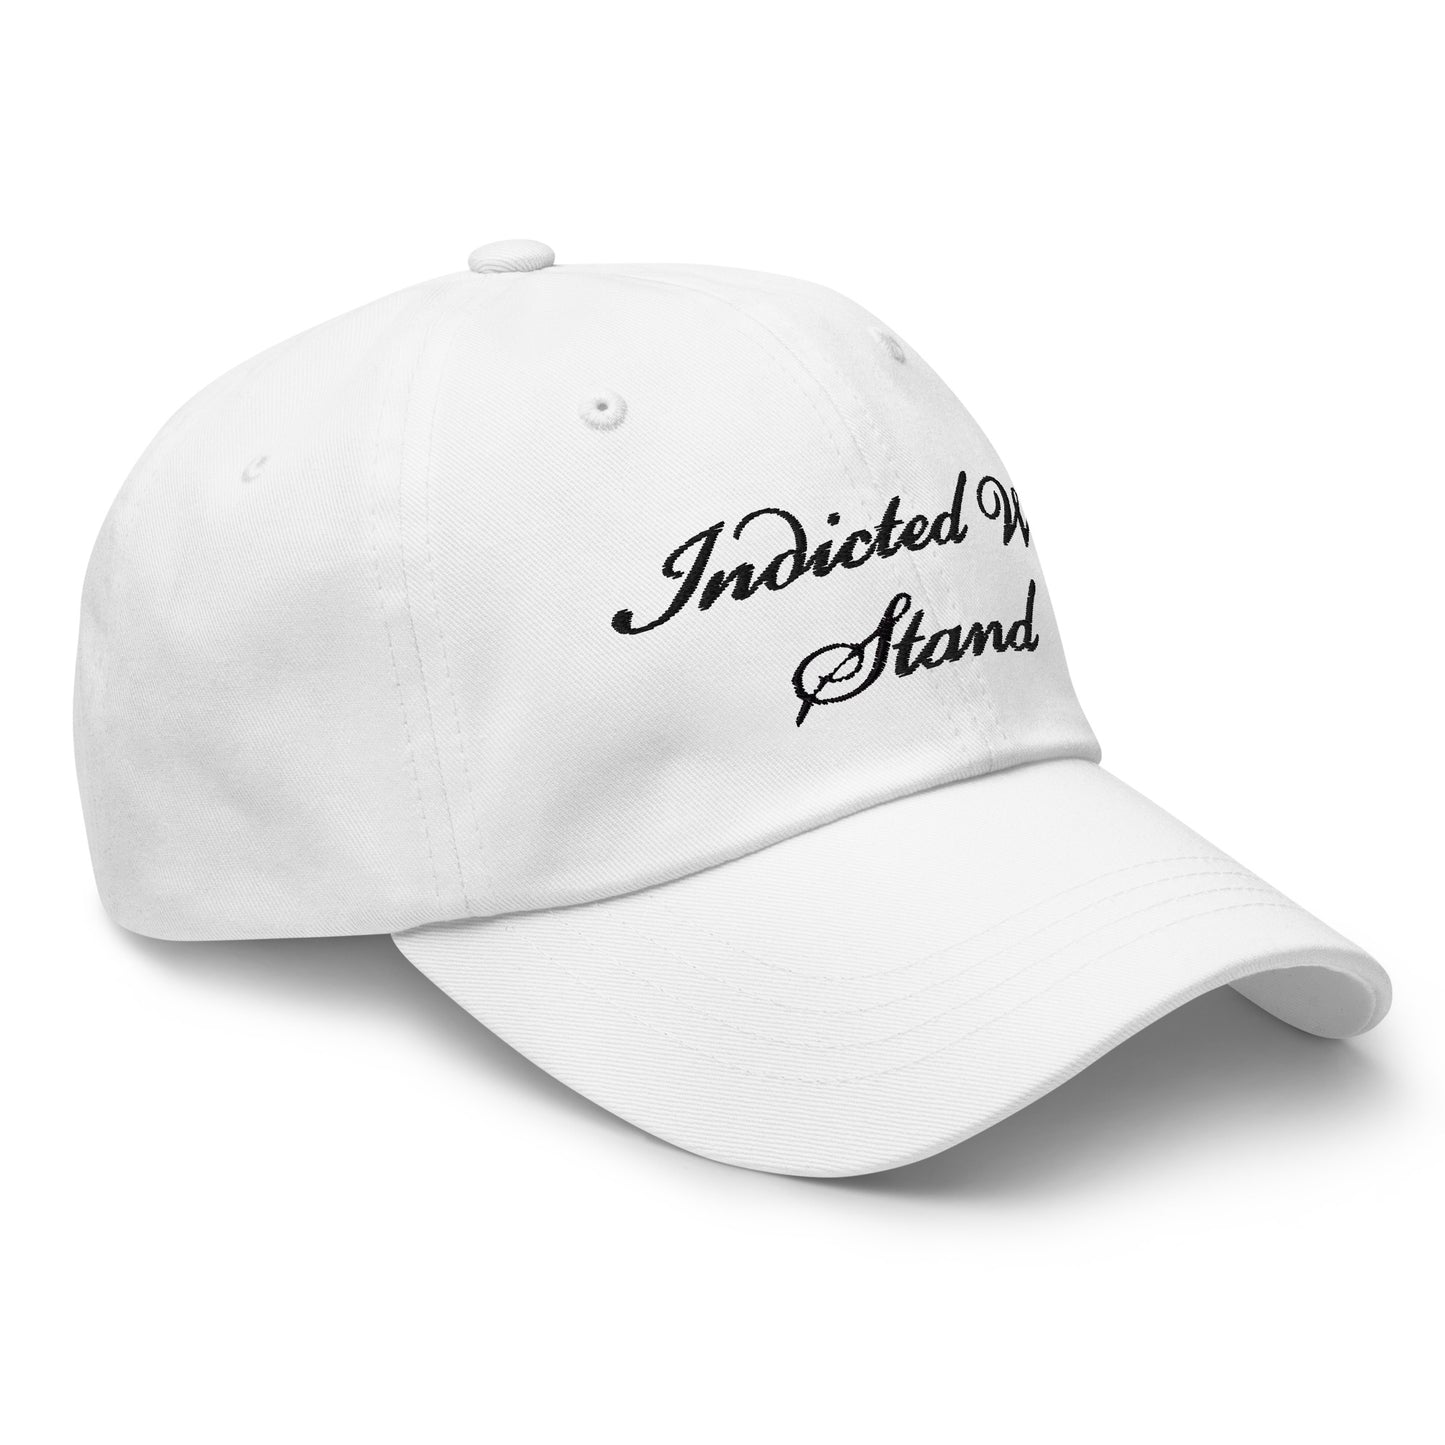 Indicted We Stand Hat